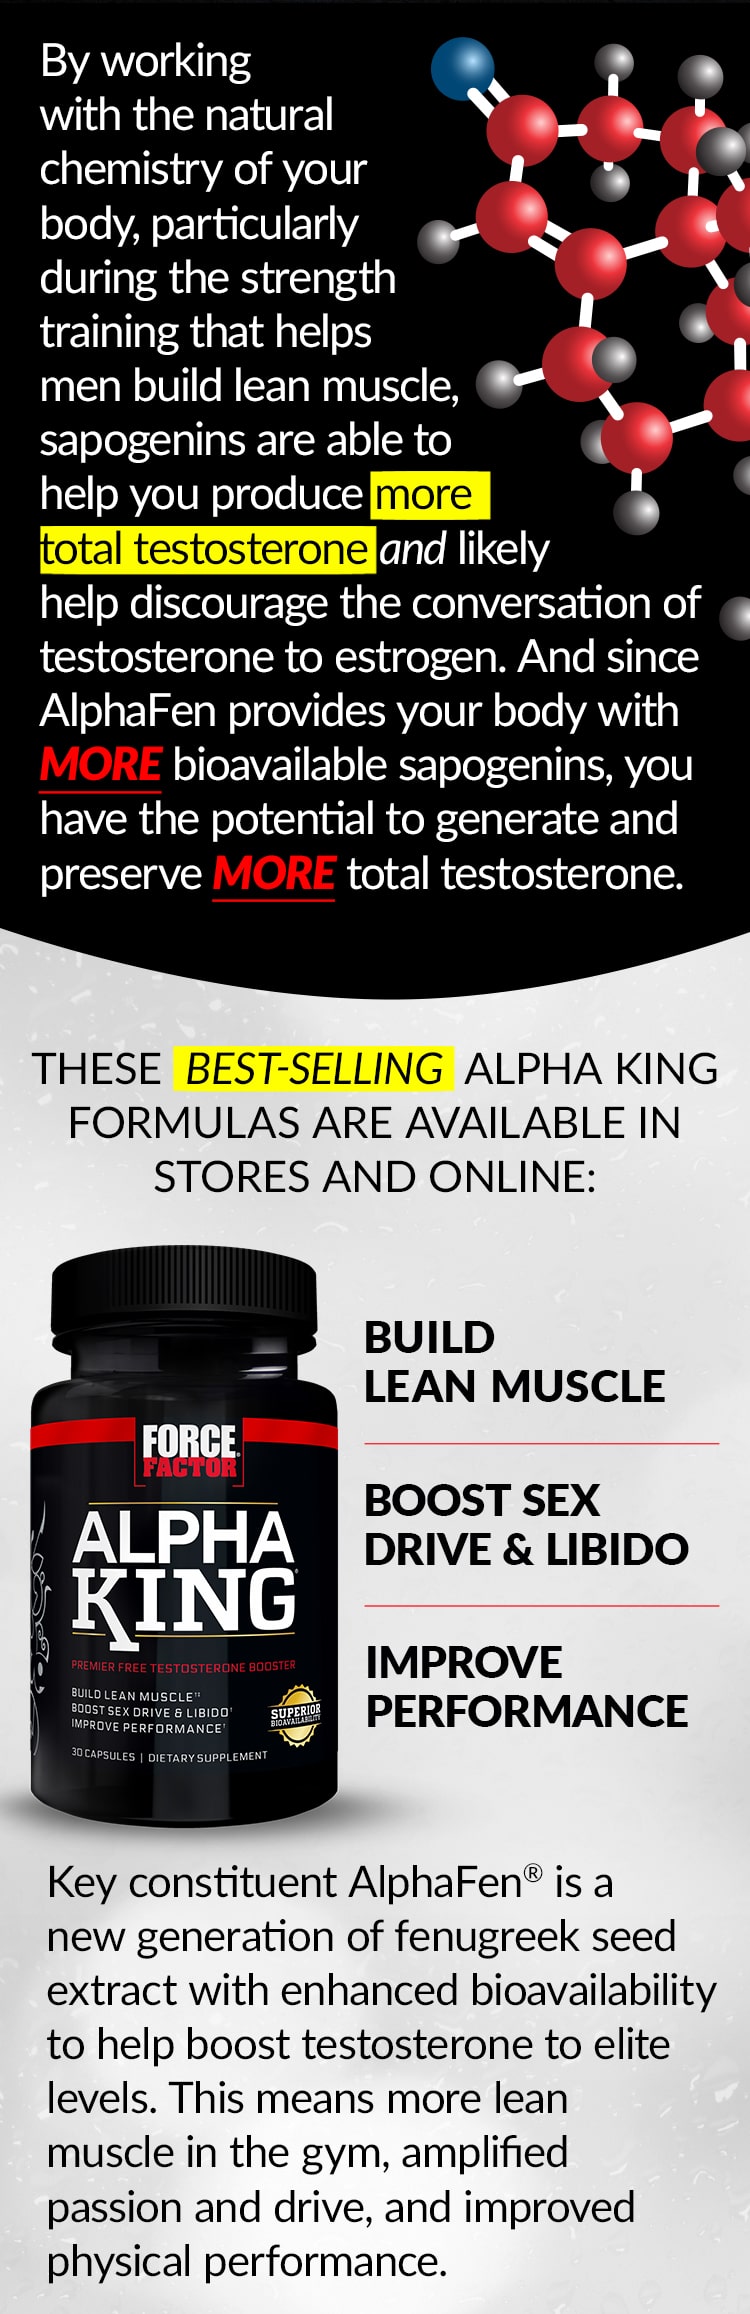 By working with the natural chemistry of your body, particularly during the strength training that helps men build lean muscle, sapogenins are able to help you produce more total testosterone and likely help discourage the conversation of testosterone to estrogen. And since AlphaFen provides your body with MORE bioavailable sapogenins, you have the potential to generate and preserve MORE total testosterone. THESE BEST-SELLING ALPHA KING FORMULAS ARE AVAILABLE IN STORES AND ONLINE: Alpha King® - BUILD LEAN MUSCLE, BOOST SEX DRIVE & LIBIDO, IMPROVE PERFORMANCE. Key constituent AlphaFen® is a new generation of fenugreek seed extract with enhanced bioavailability to help boost testosterone to elite levels. This means more lean muscle in the gym, amplified passion and drive, and improved physical performance.